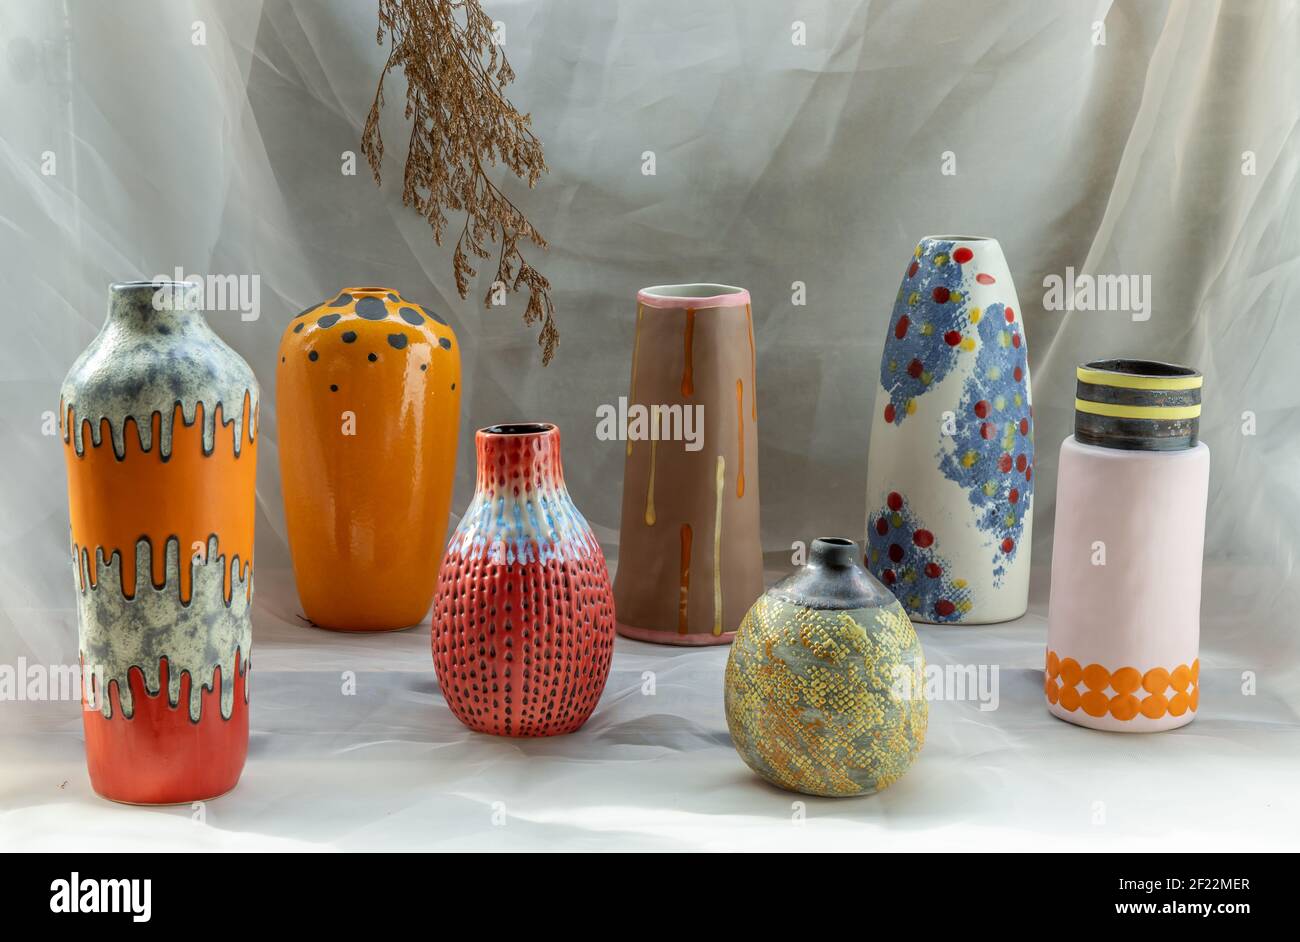 Handmade Assorted Many Different Ceramic Vases on Calico textured table cloth with old cement wall. Home decor. Selective focus. Stock Photo